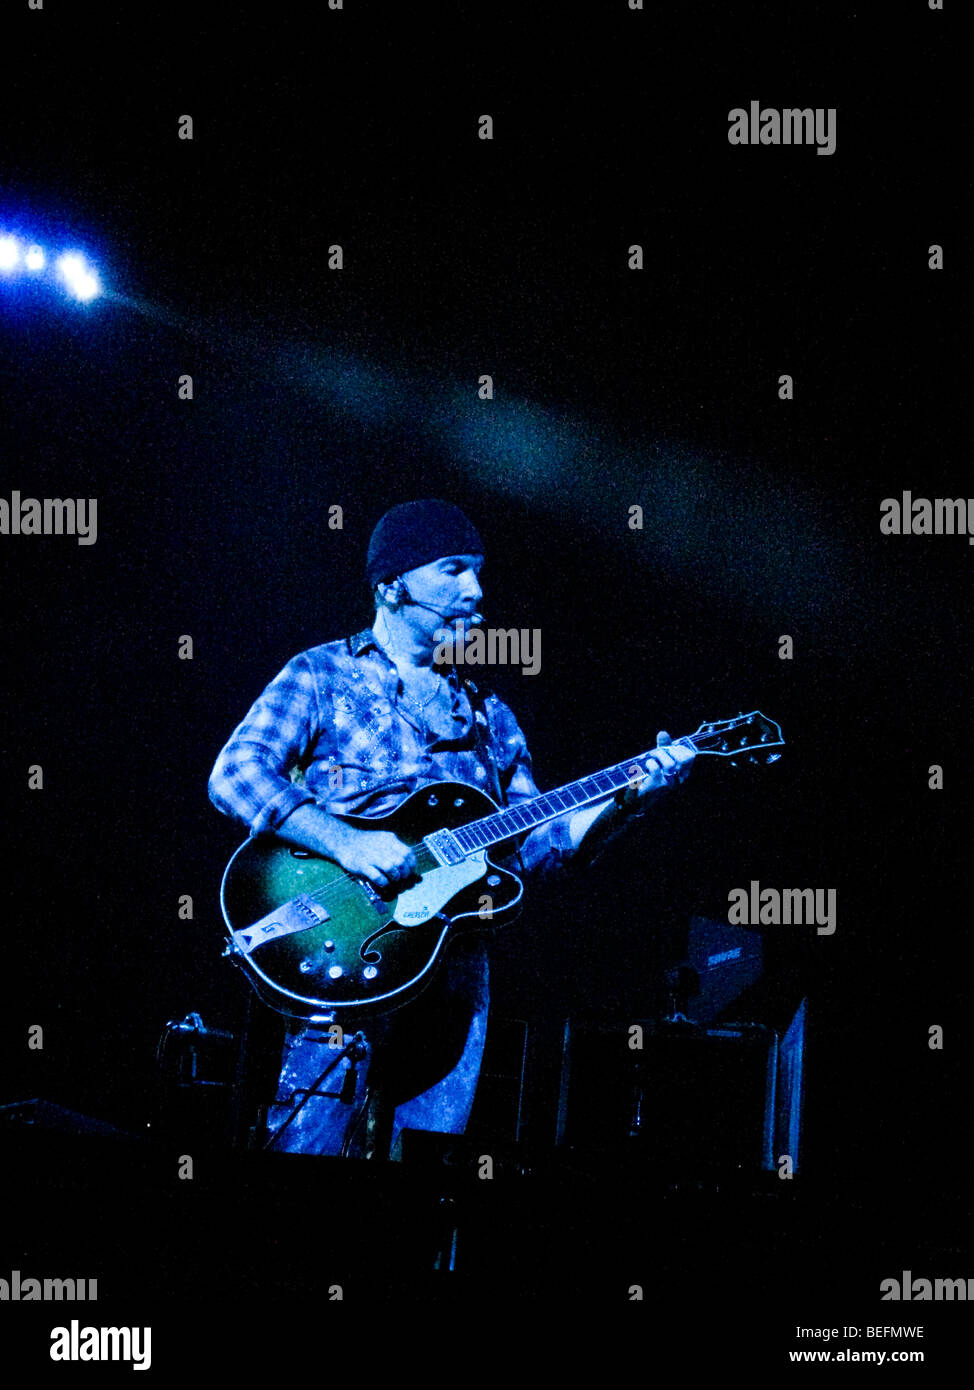 The Edge, guitarist of the Irish rock band U2, performs live at FedEx Field during U2's 360 Tour. Stock Photo